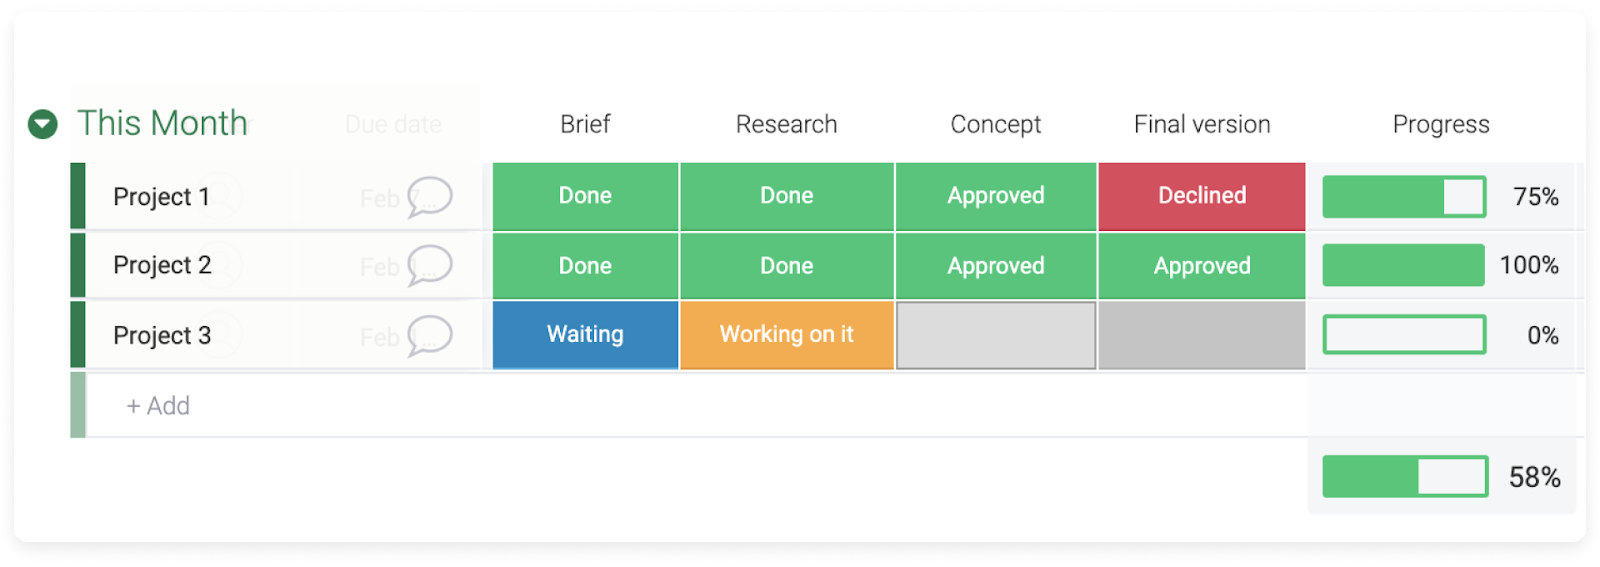 monday.com allows users to add the progress column to their board, enabling them to easily keep on top of project progress.